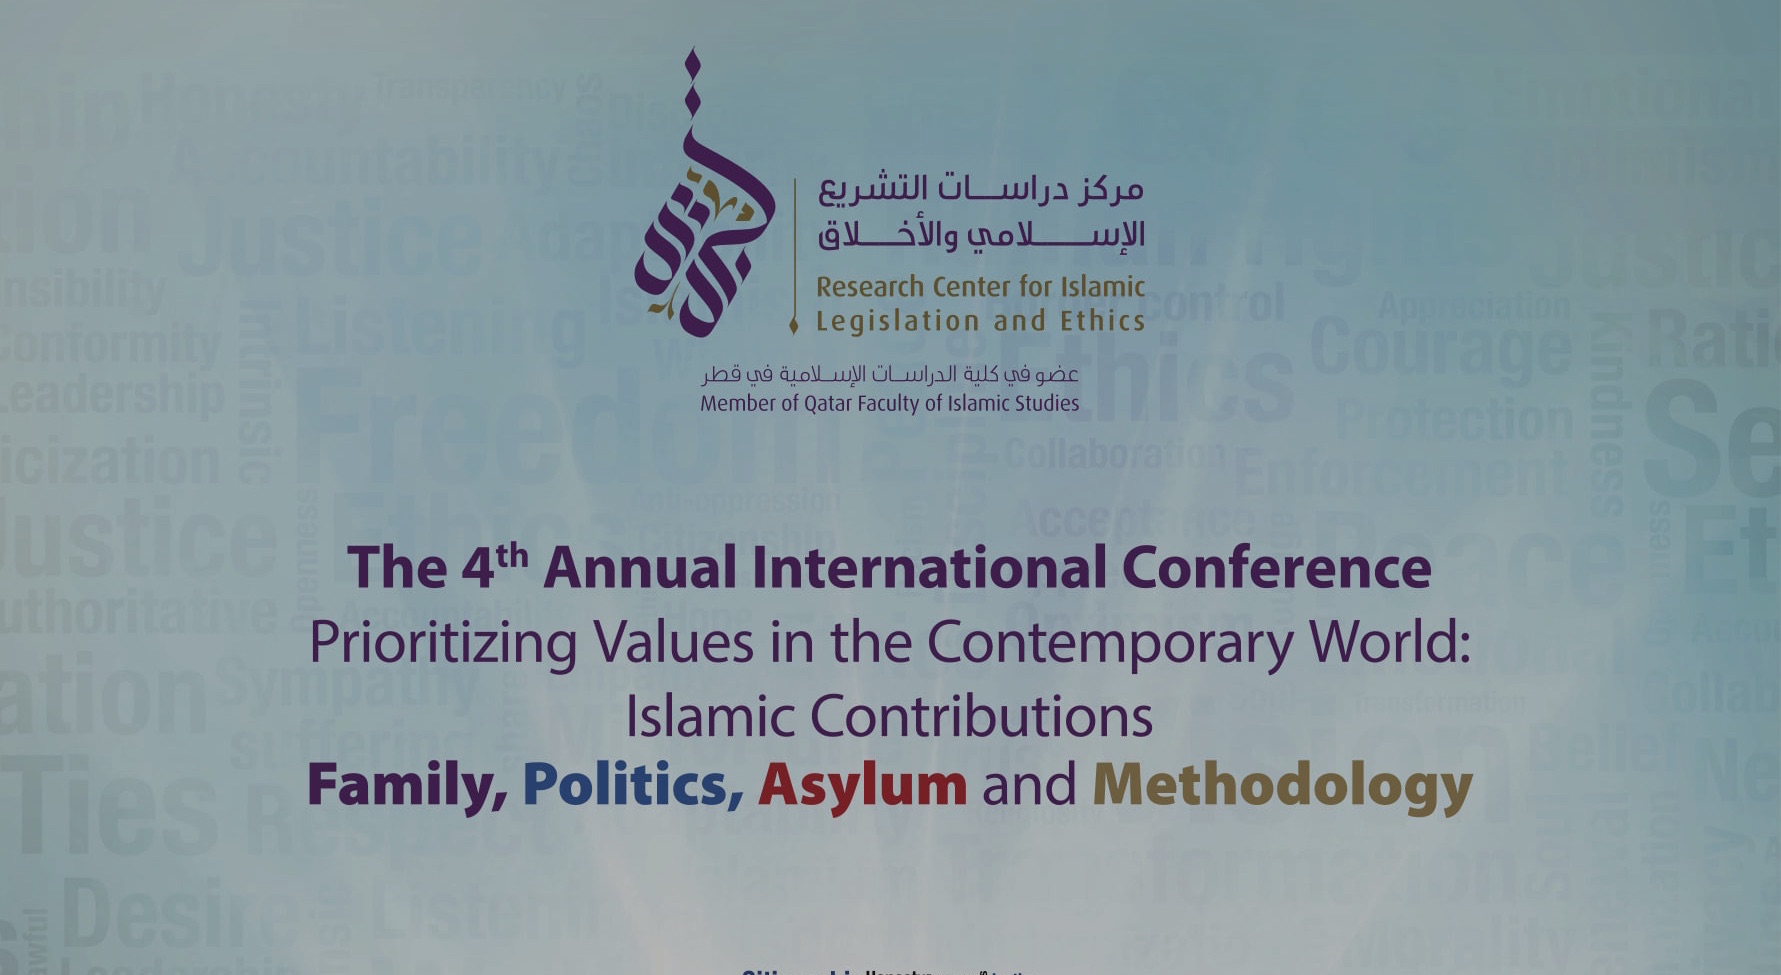 #CILE2016 Prioritizing Values in the Contemporary World: Islamic Contributions